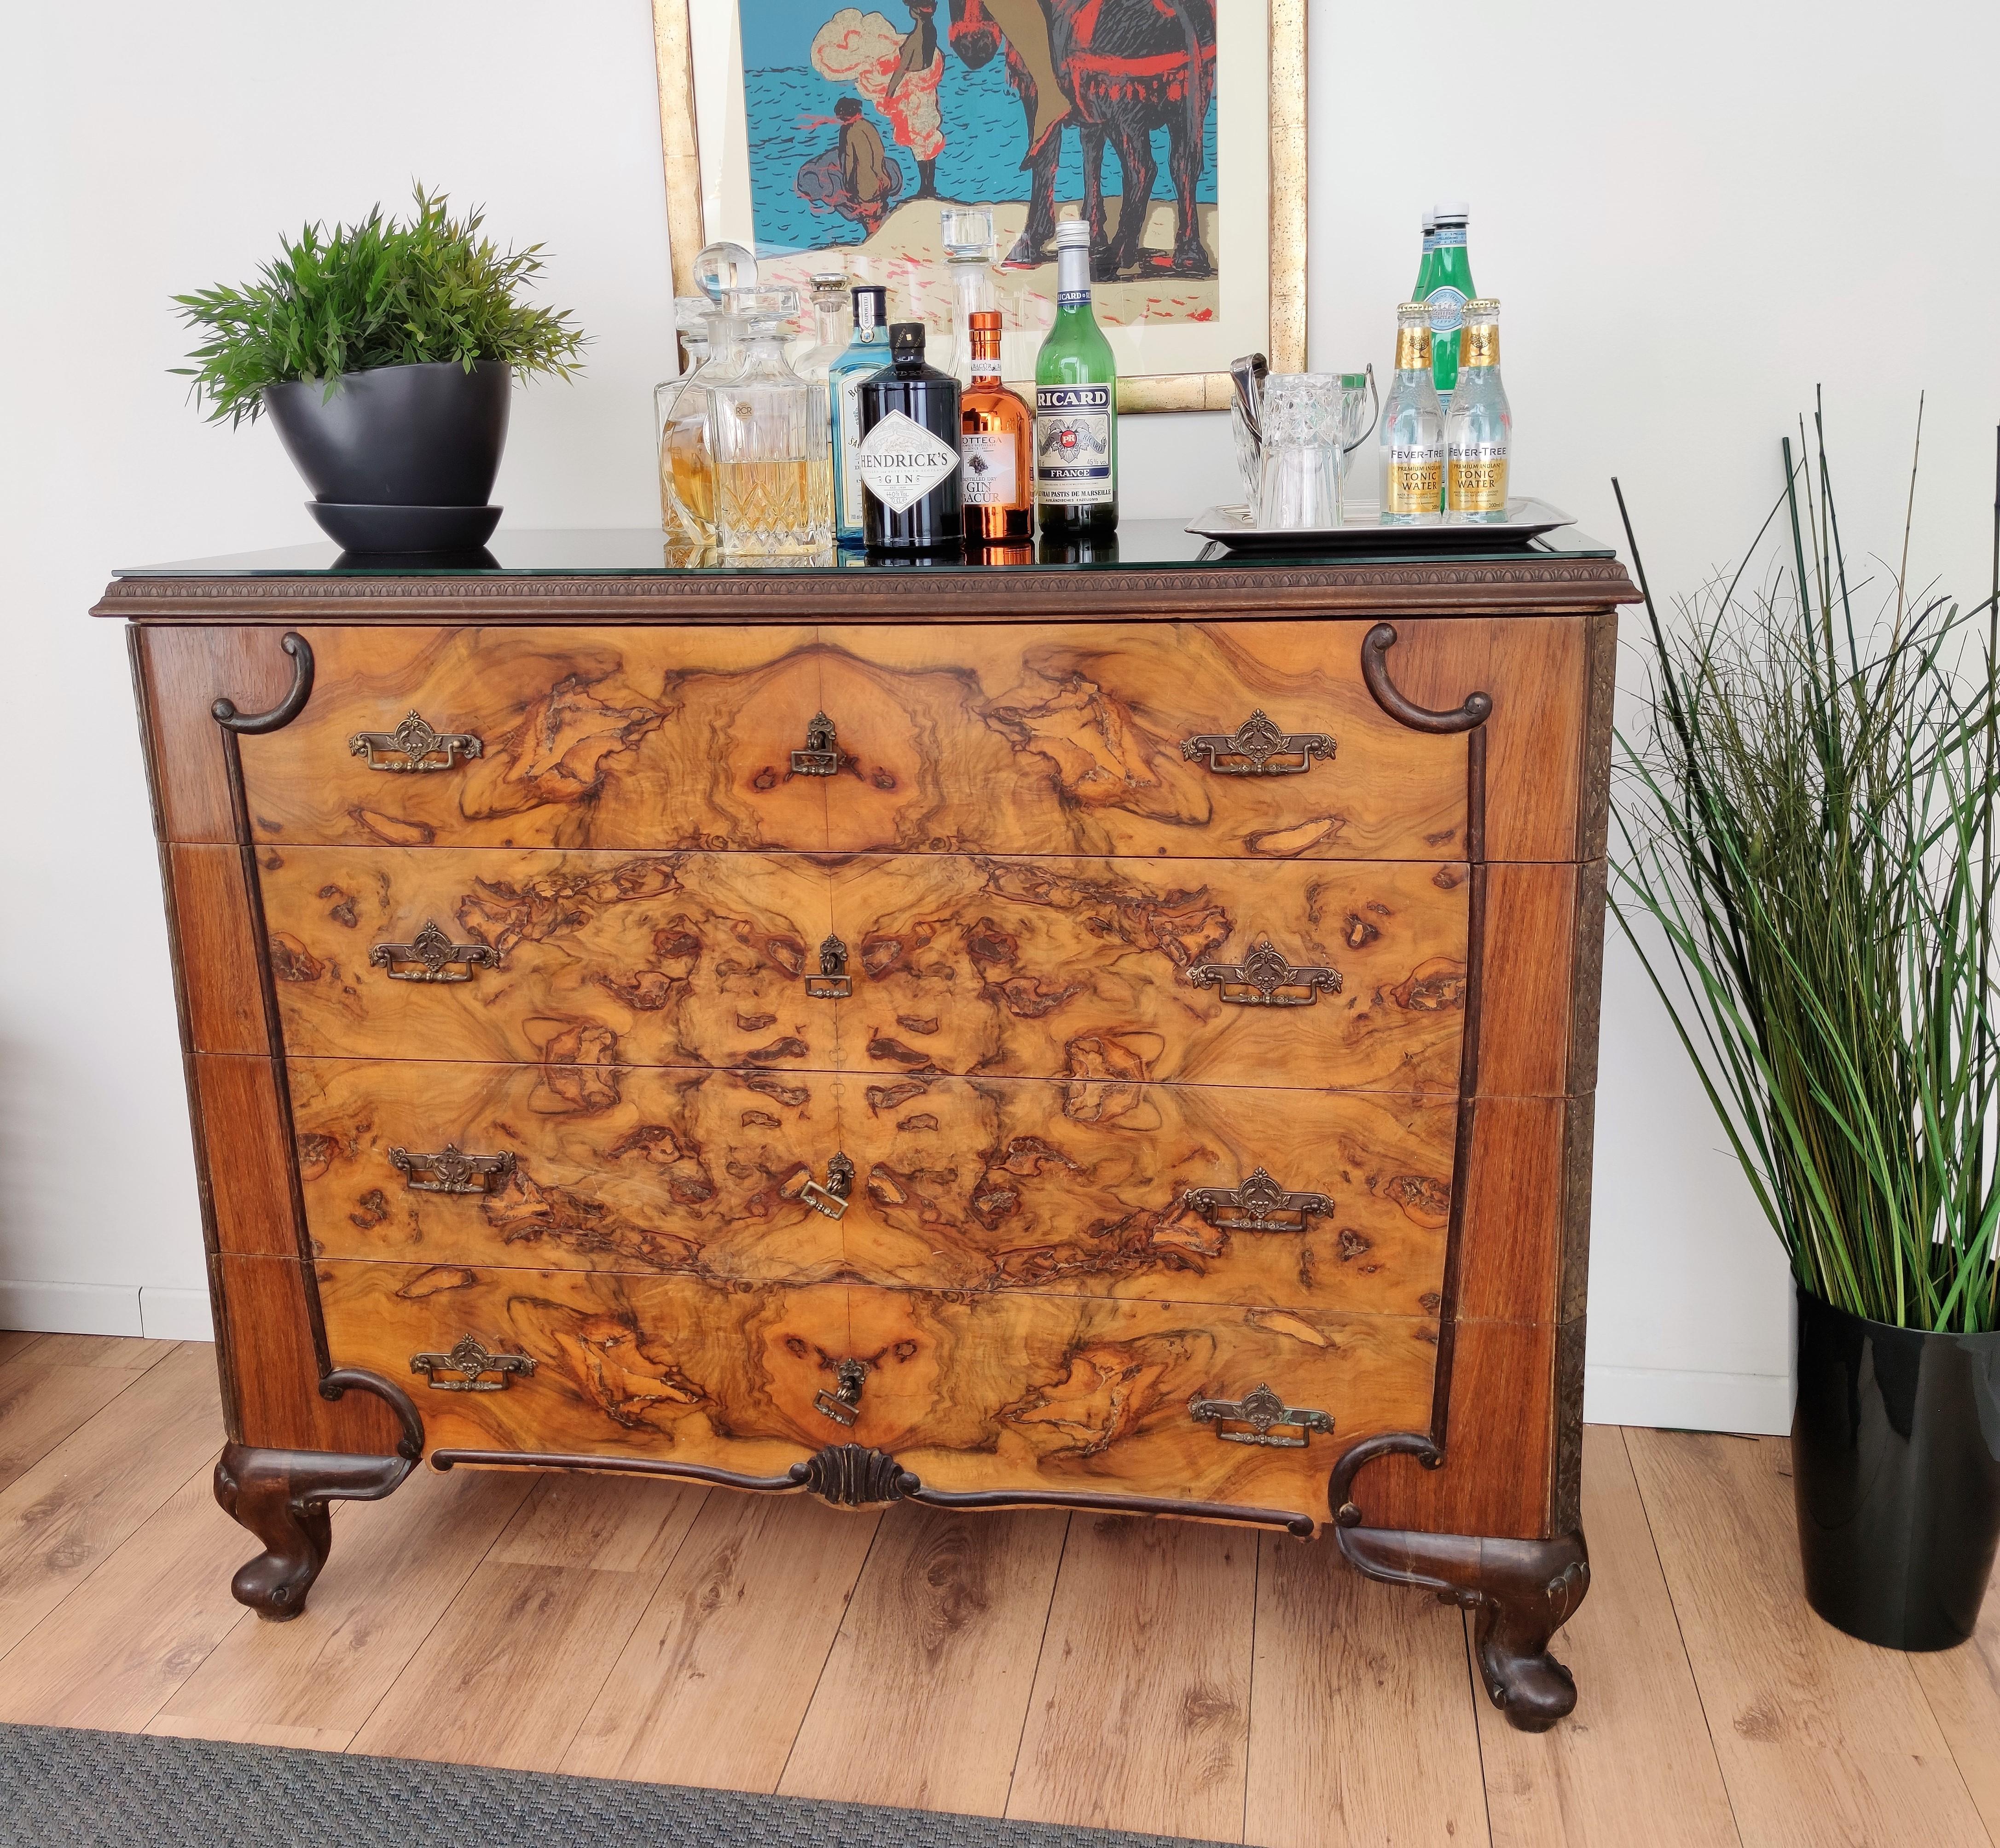 Very elegant walnut burl Italian Art Deco Mid-Century Modern chest of drawers, commode cabinet with 4 drawers and brass decorated handles and keys with black glass top. The unique and typical design and shapes make this a true statement piece in any